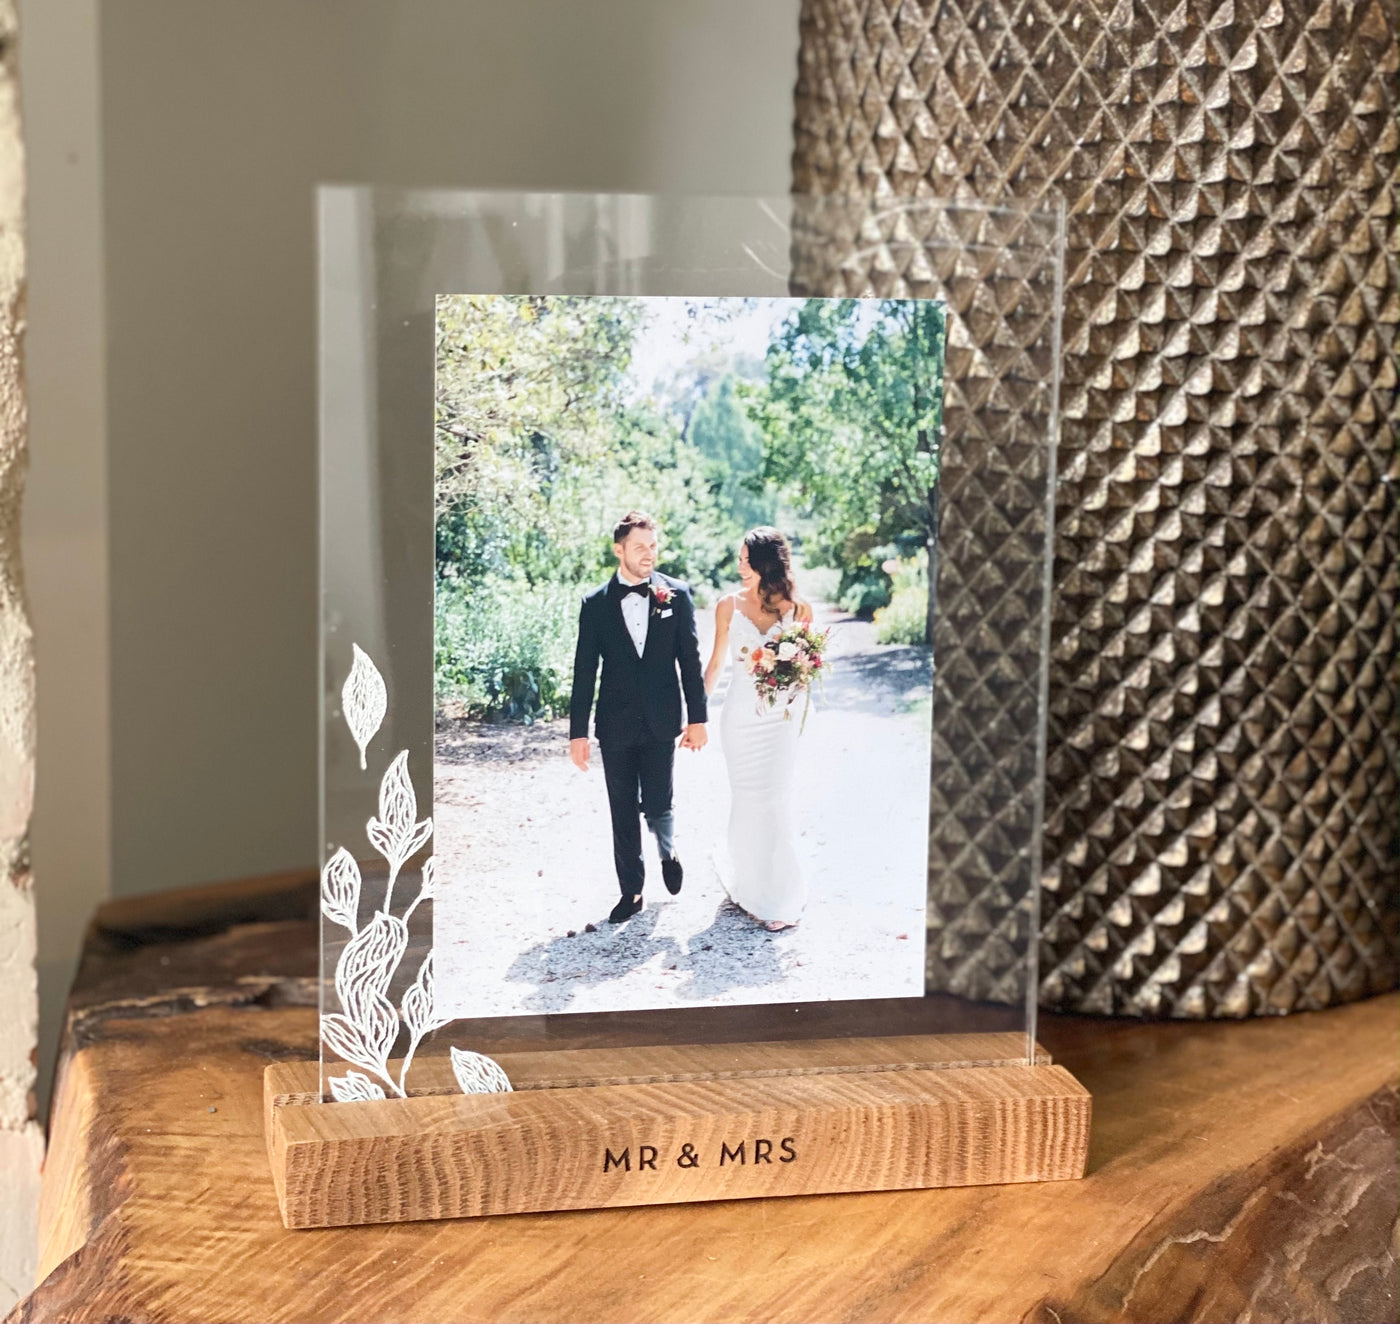 mr & mrs engraved wooden base frame, with 2 acrylic plaques engraved with flowers holding a wedding photo of a couple holding hands. The frame comes in various scripts.